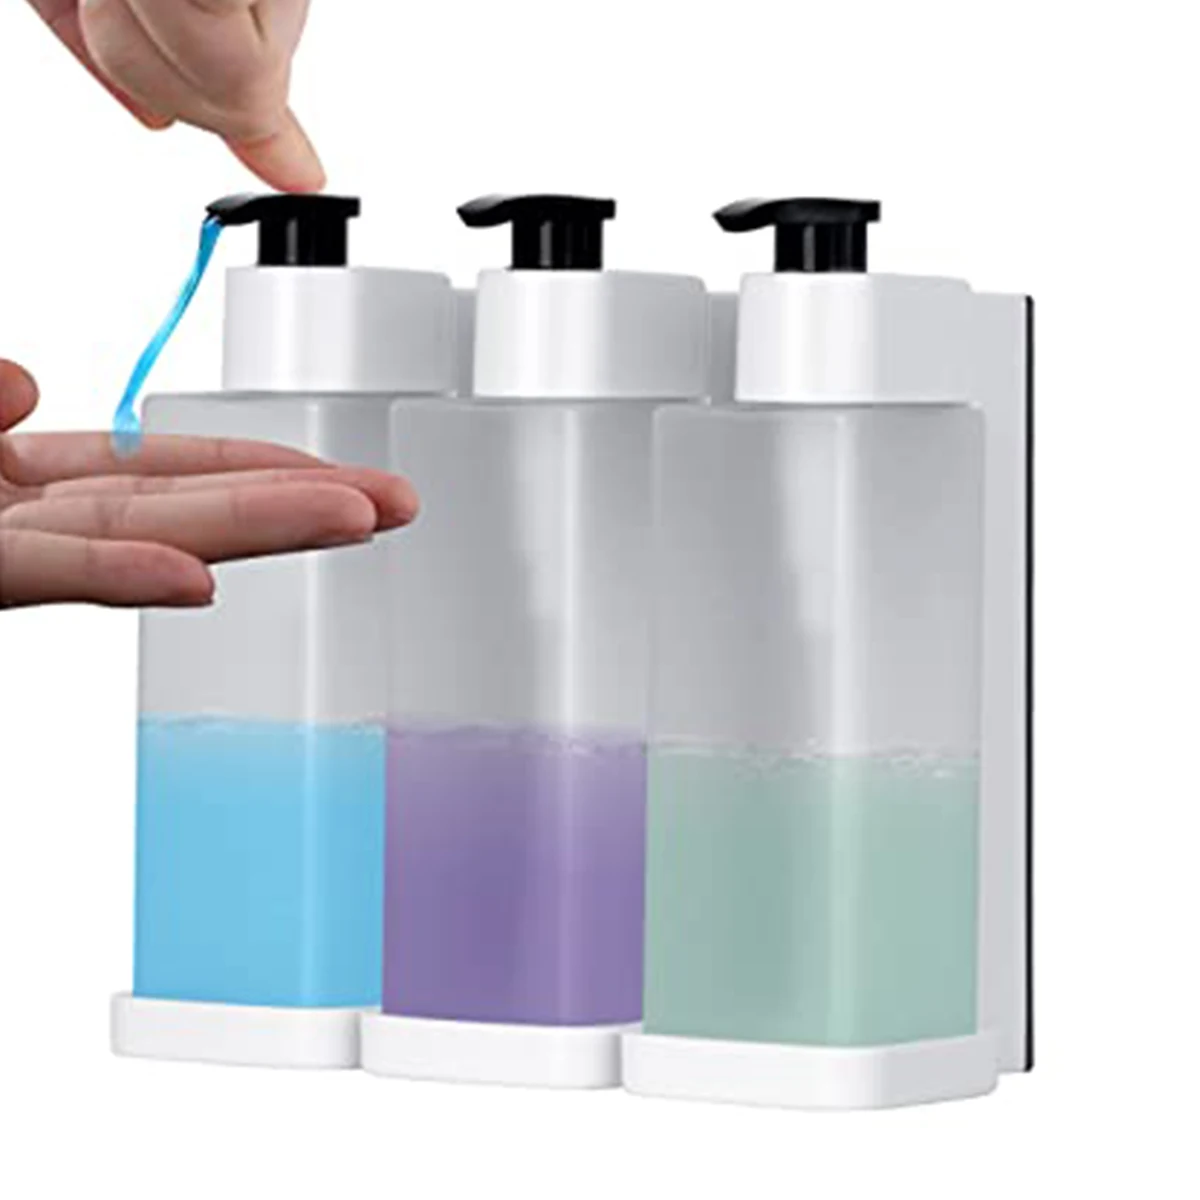 Wall Mounted Soap Bottle Dispenser Holder for Soap, Shampoo, Conditioner,  or Lotion Bottle (1-1/8 Hole)